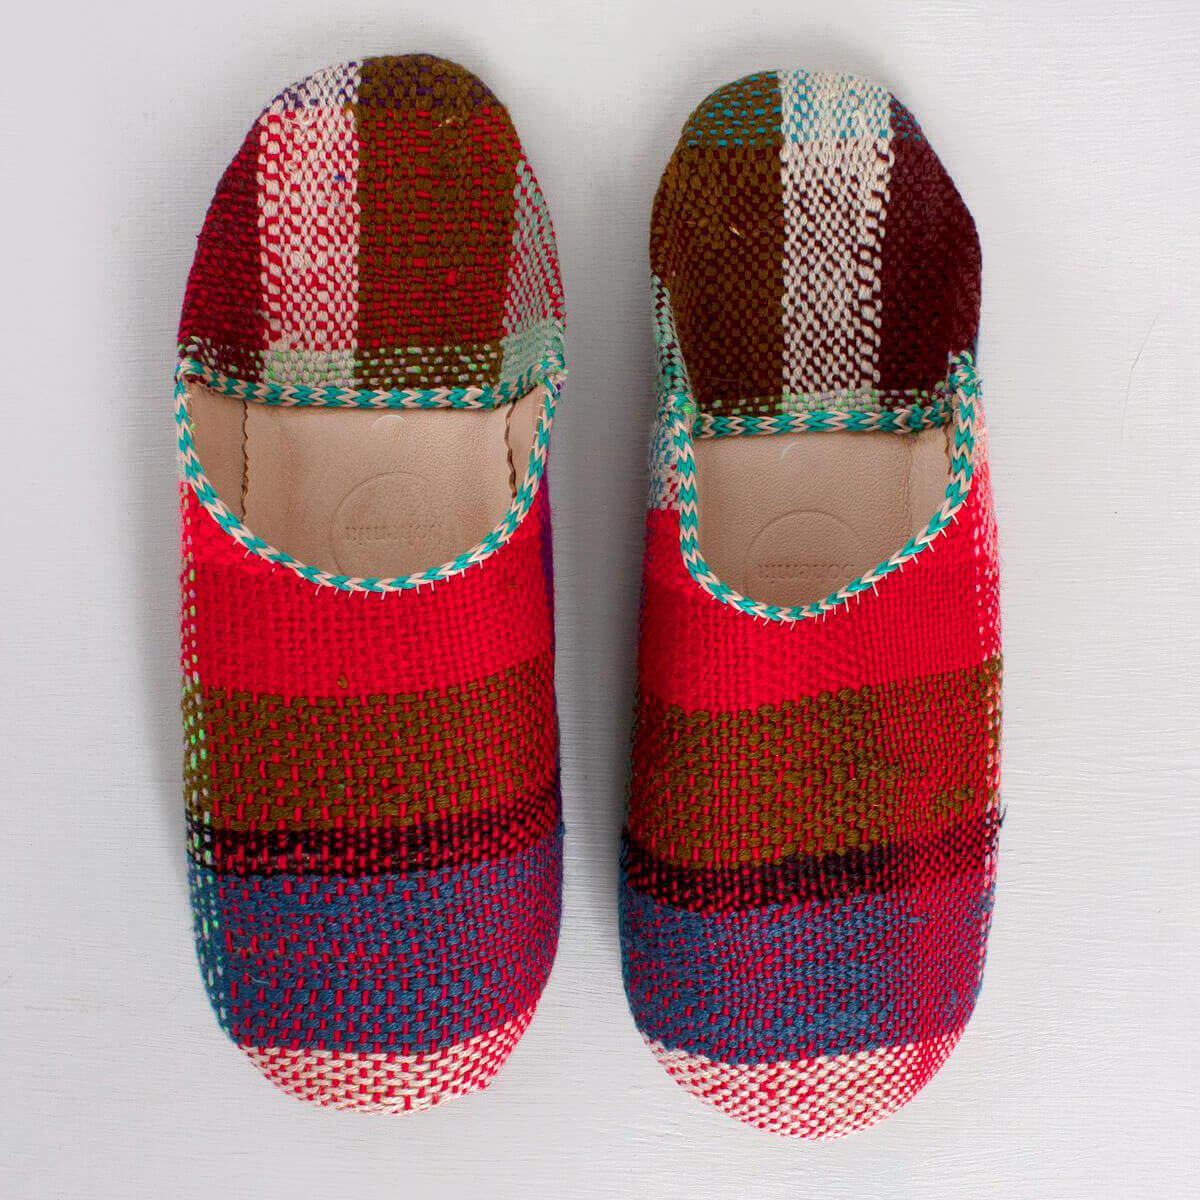 Moroccan Slippers - Plaid